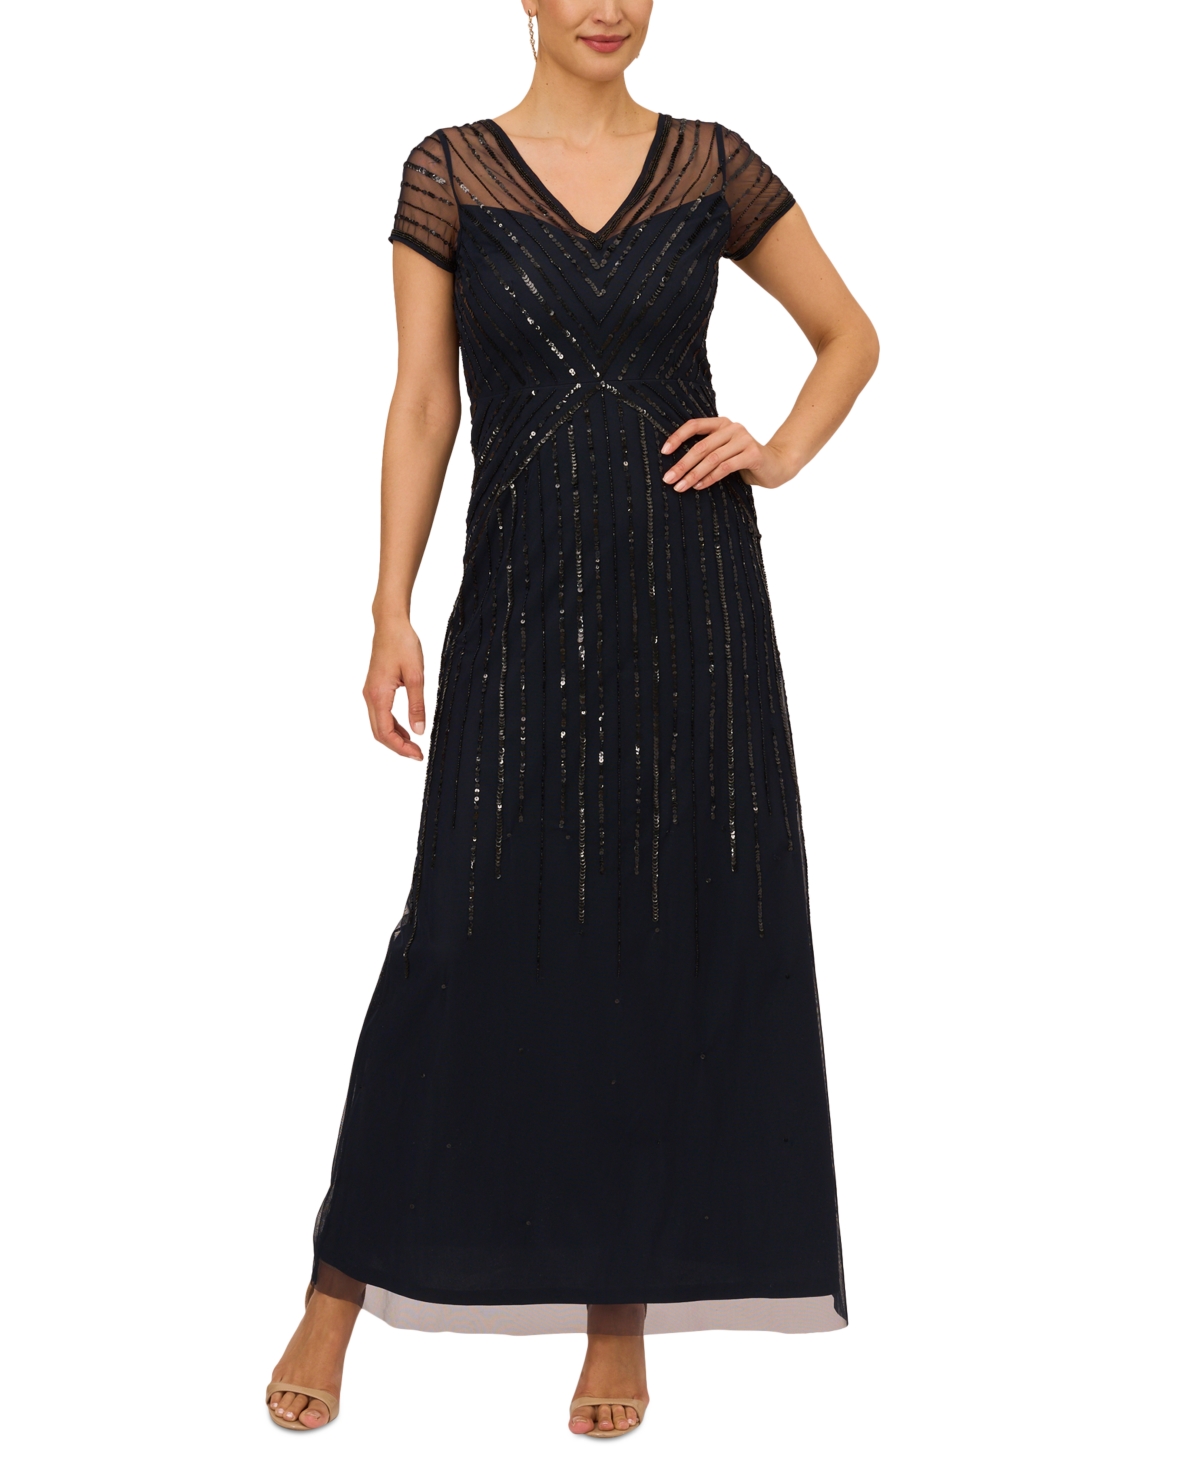 Great Gatsby Dress – Great Gatsby Dresses for Sale Papell Studio Womens V-Neck Short-Sleeve Sequin Gown - MidnightBlack $159.00 AT vintagedancer.com